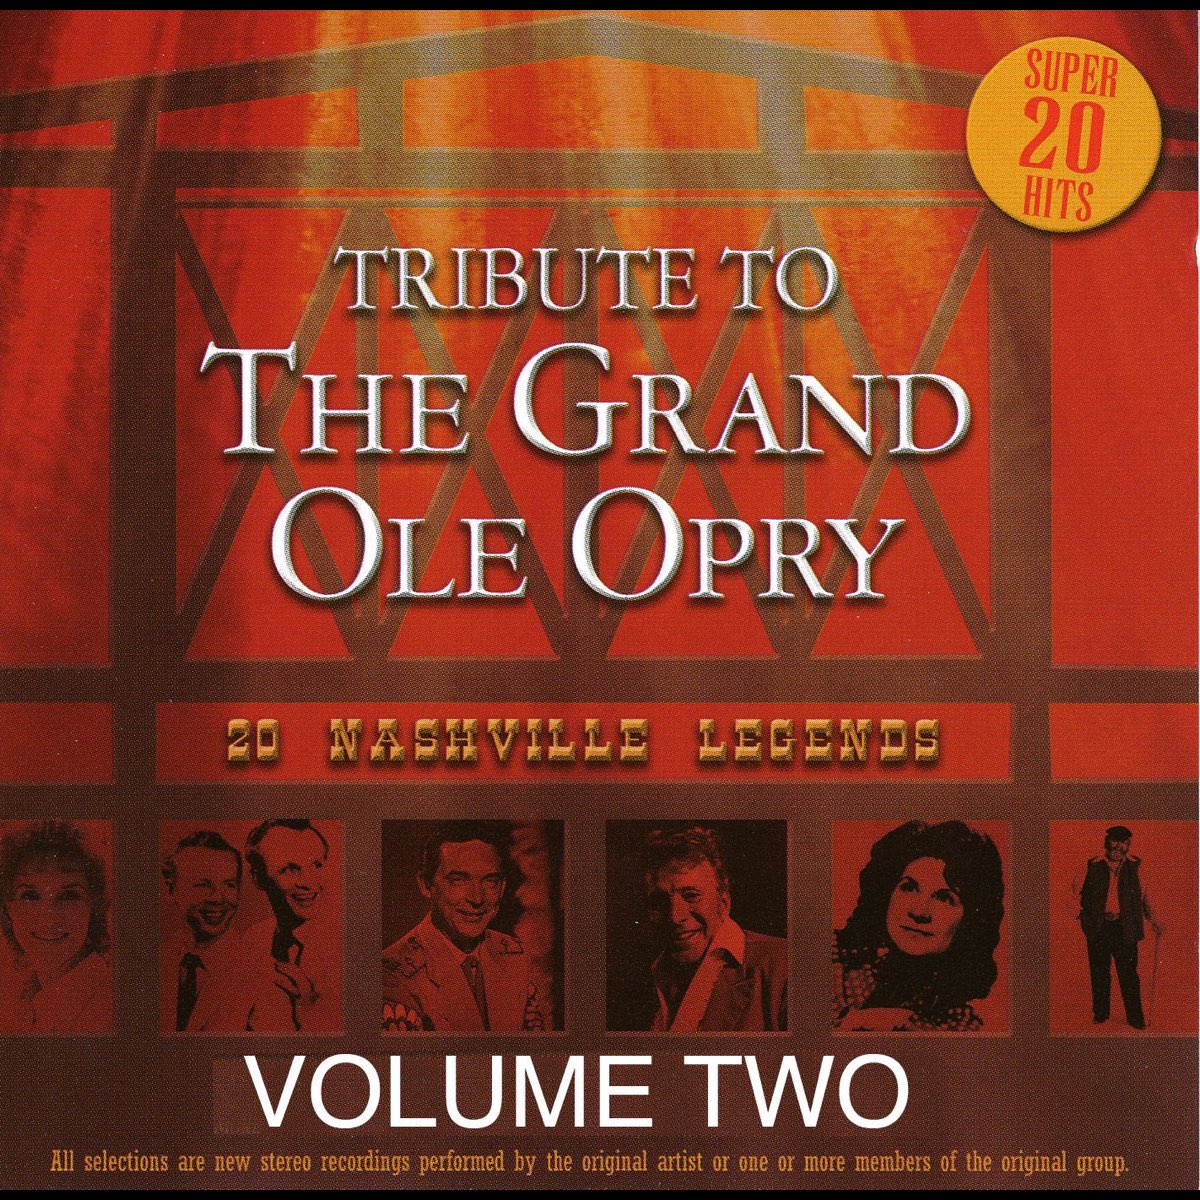 ‎Tribute to the Grand Ole Opry, Vol. 2 (ReRecorded Versions) by